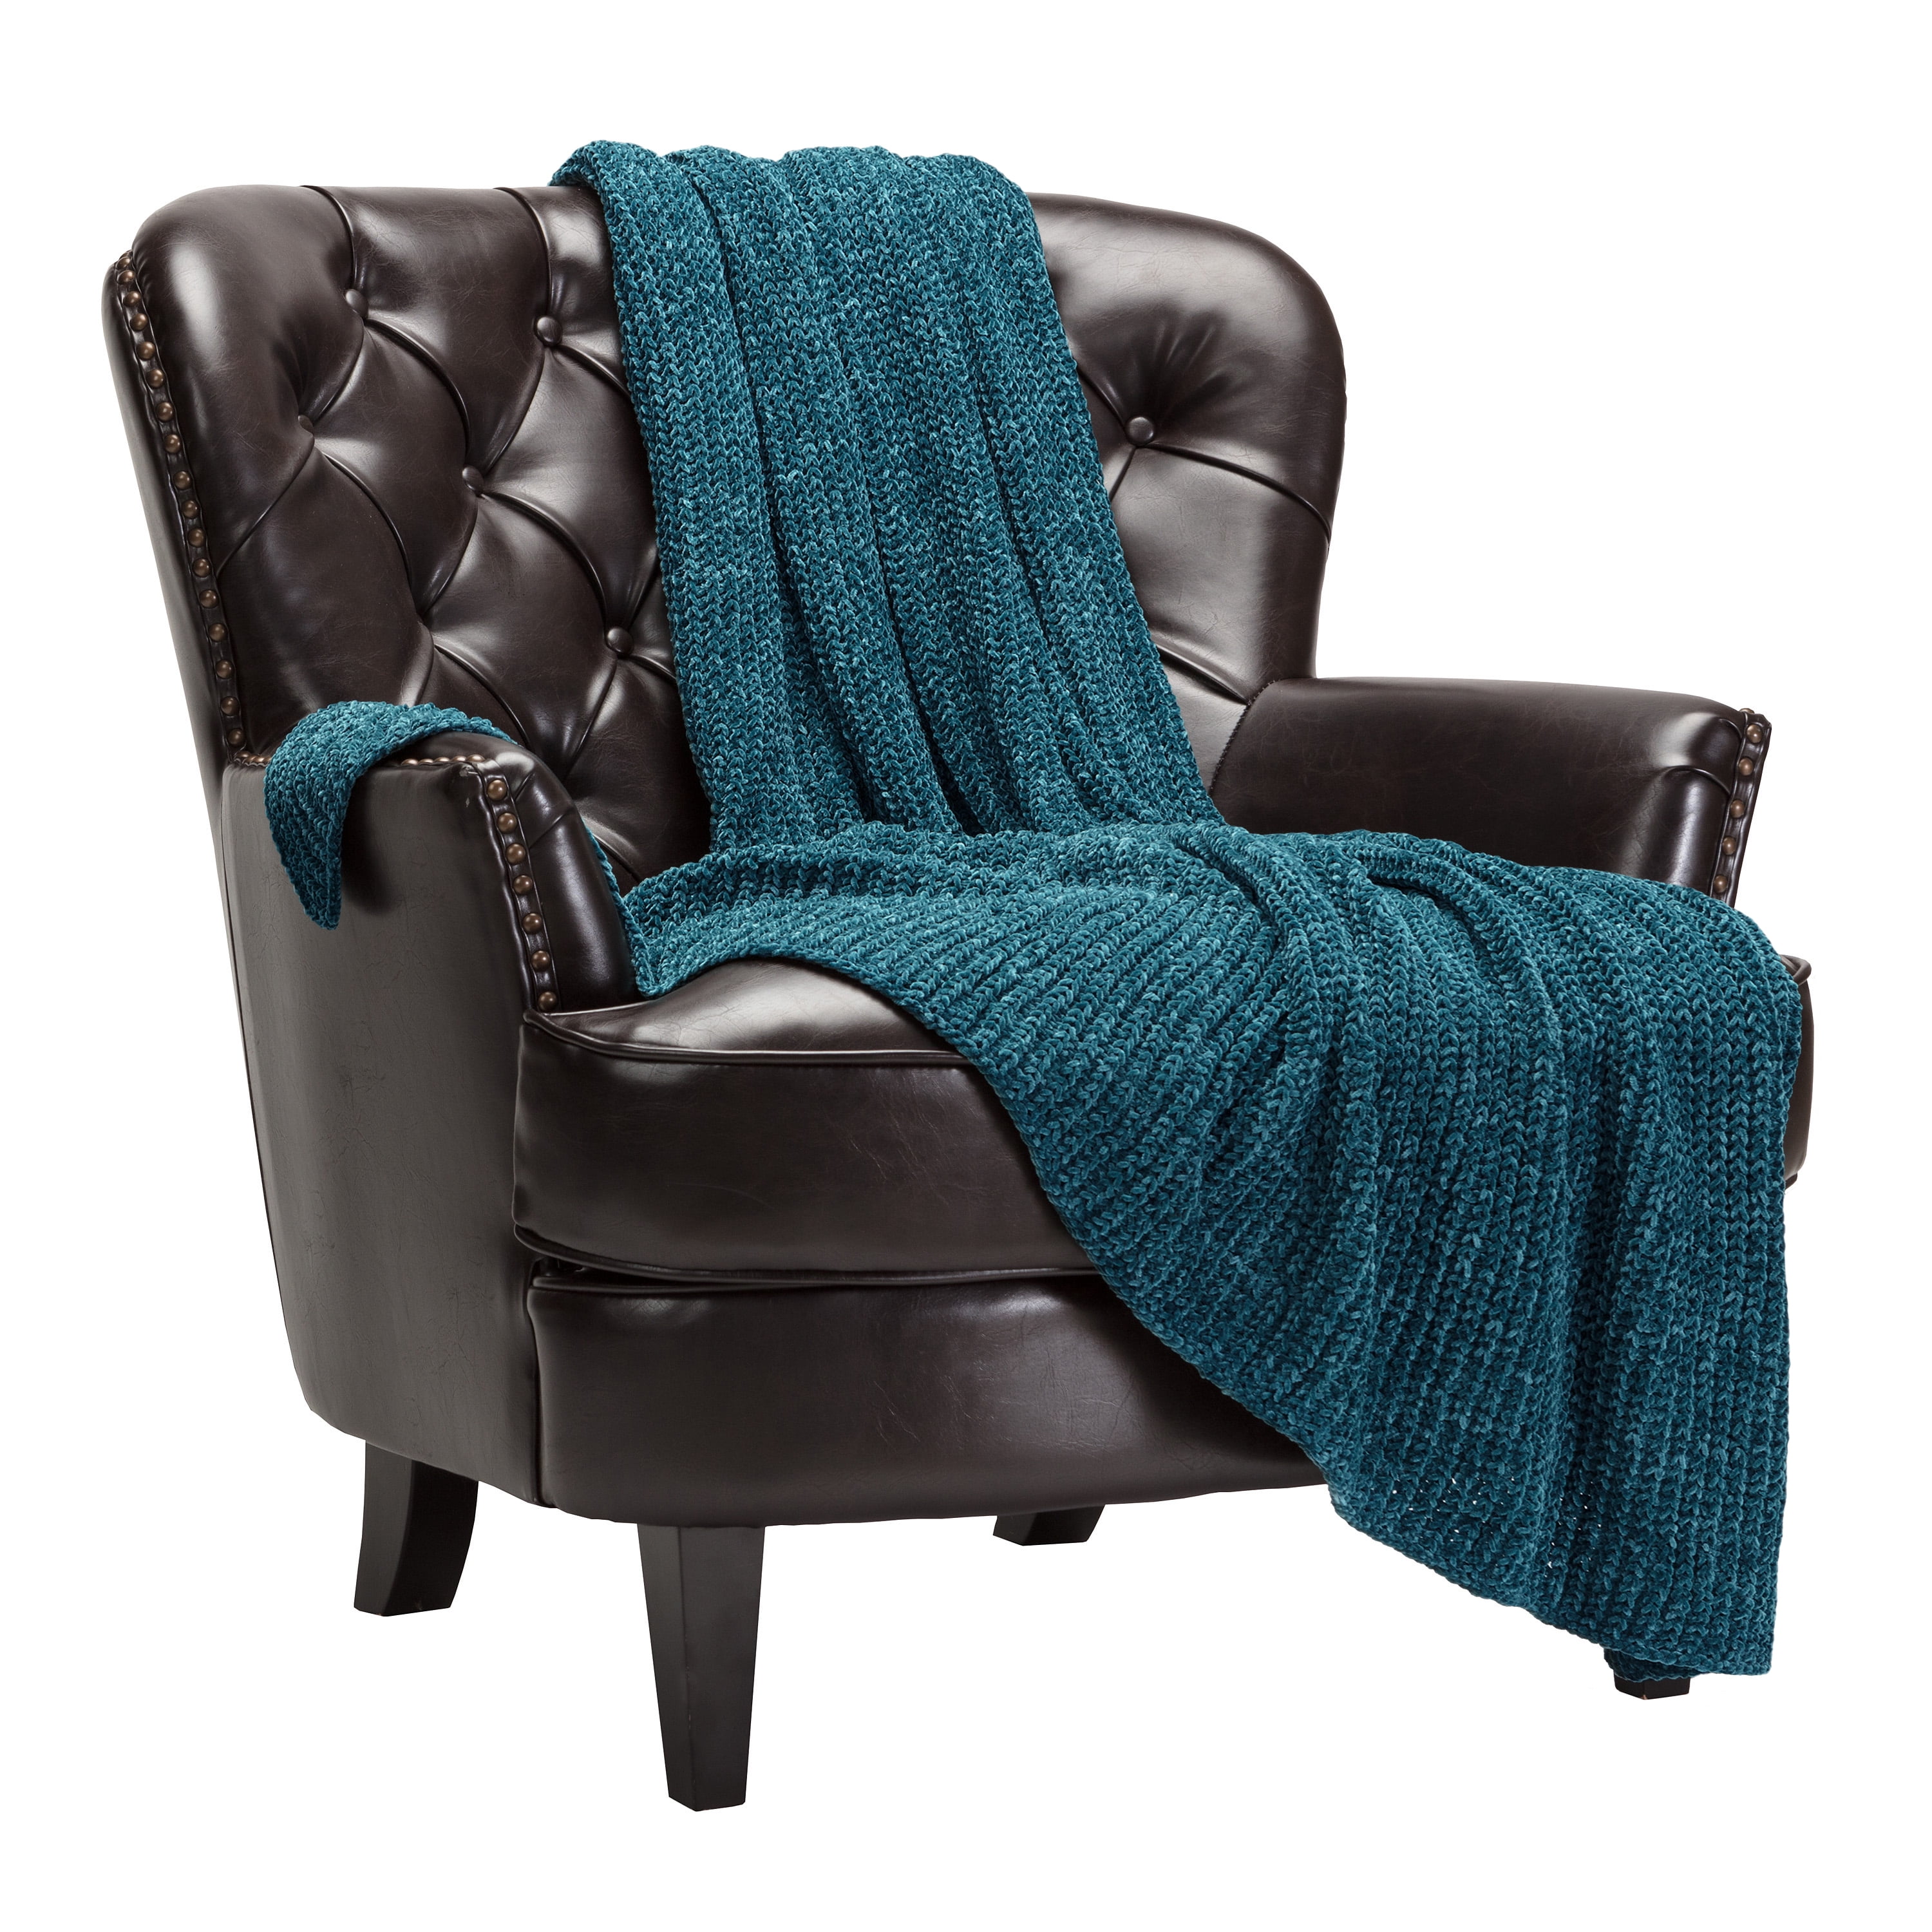 50x65 Inches Teal Chanasya Chenille Knit Super Soft Velvety Texture Throw Blanket Cozy Classy Elegant Decorative with Subtle Shimmer for Sofa Chair Couch Bed Living Bed Room Teal Blue Blanket - 